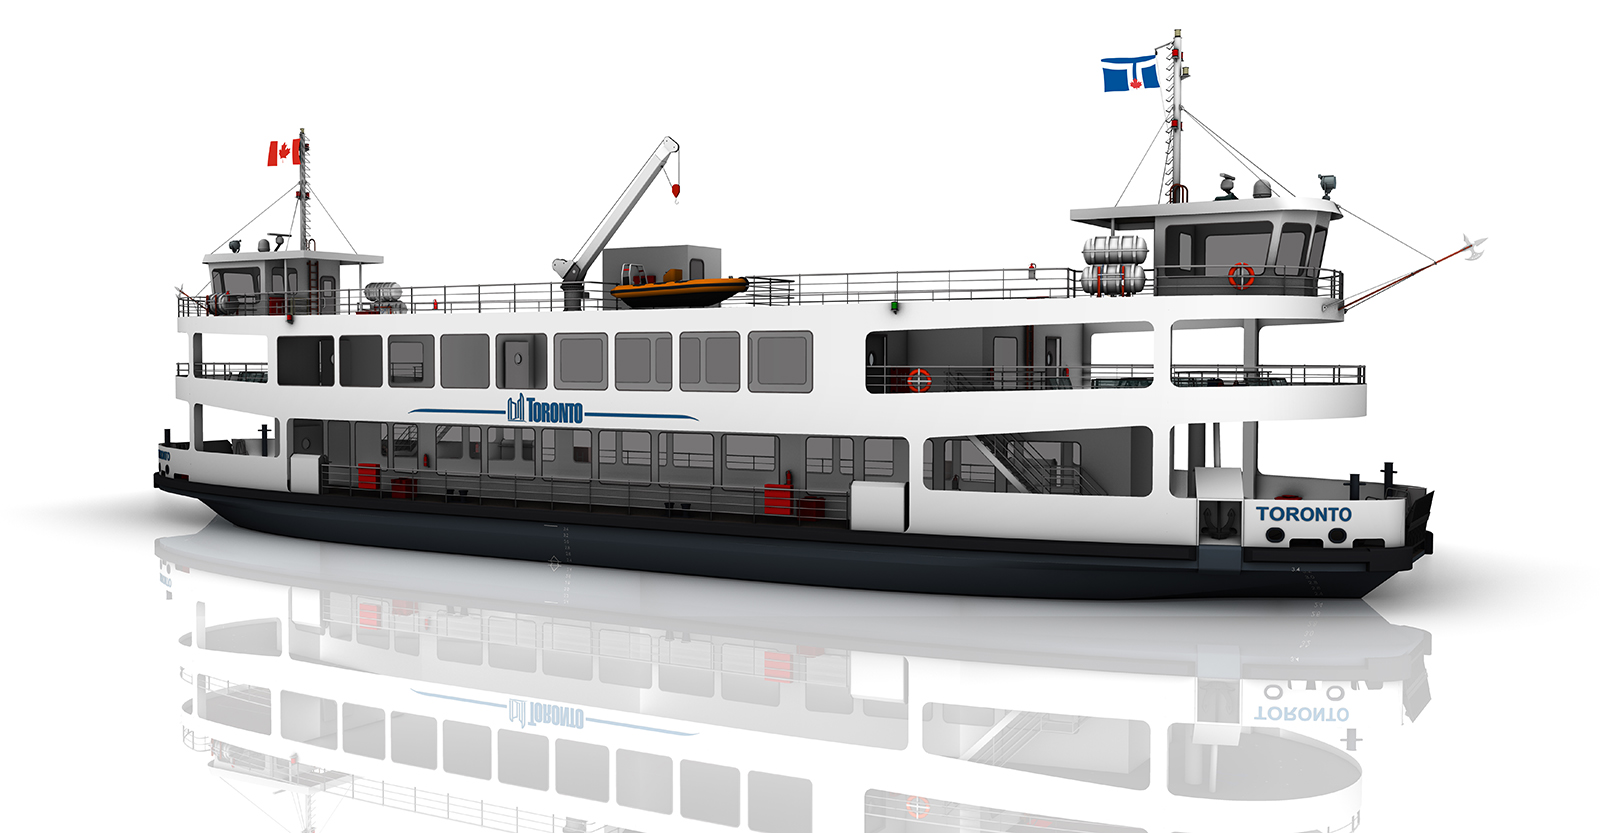 A rendering of the passenger only ferry design (called PAX) while on the water with the Toronto city skyline in the background. The ferry is long, white, with two levels with windows on both. A black ledge along the side of the ferry shows the vessels passenger side loading feature. 